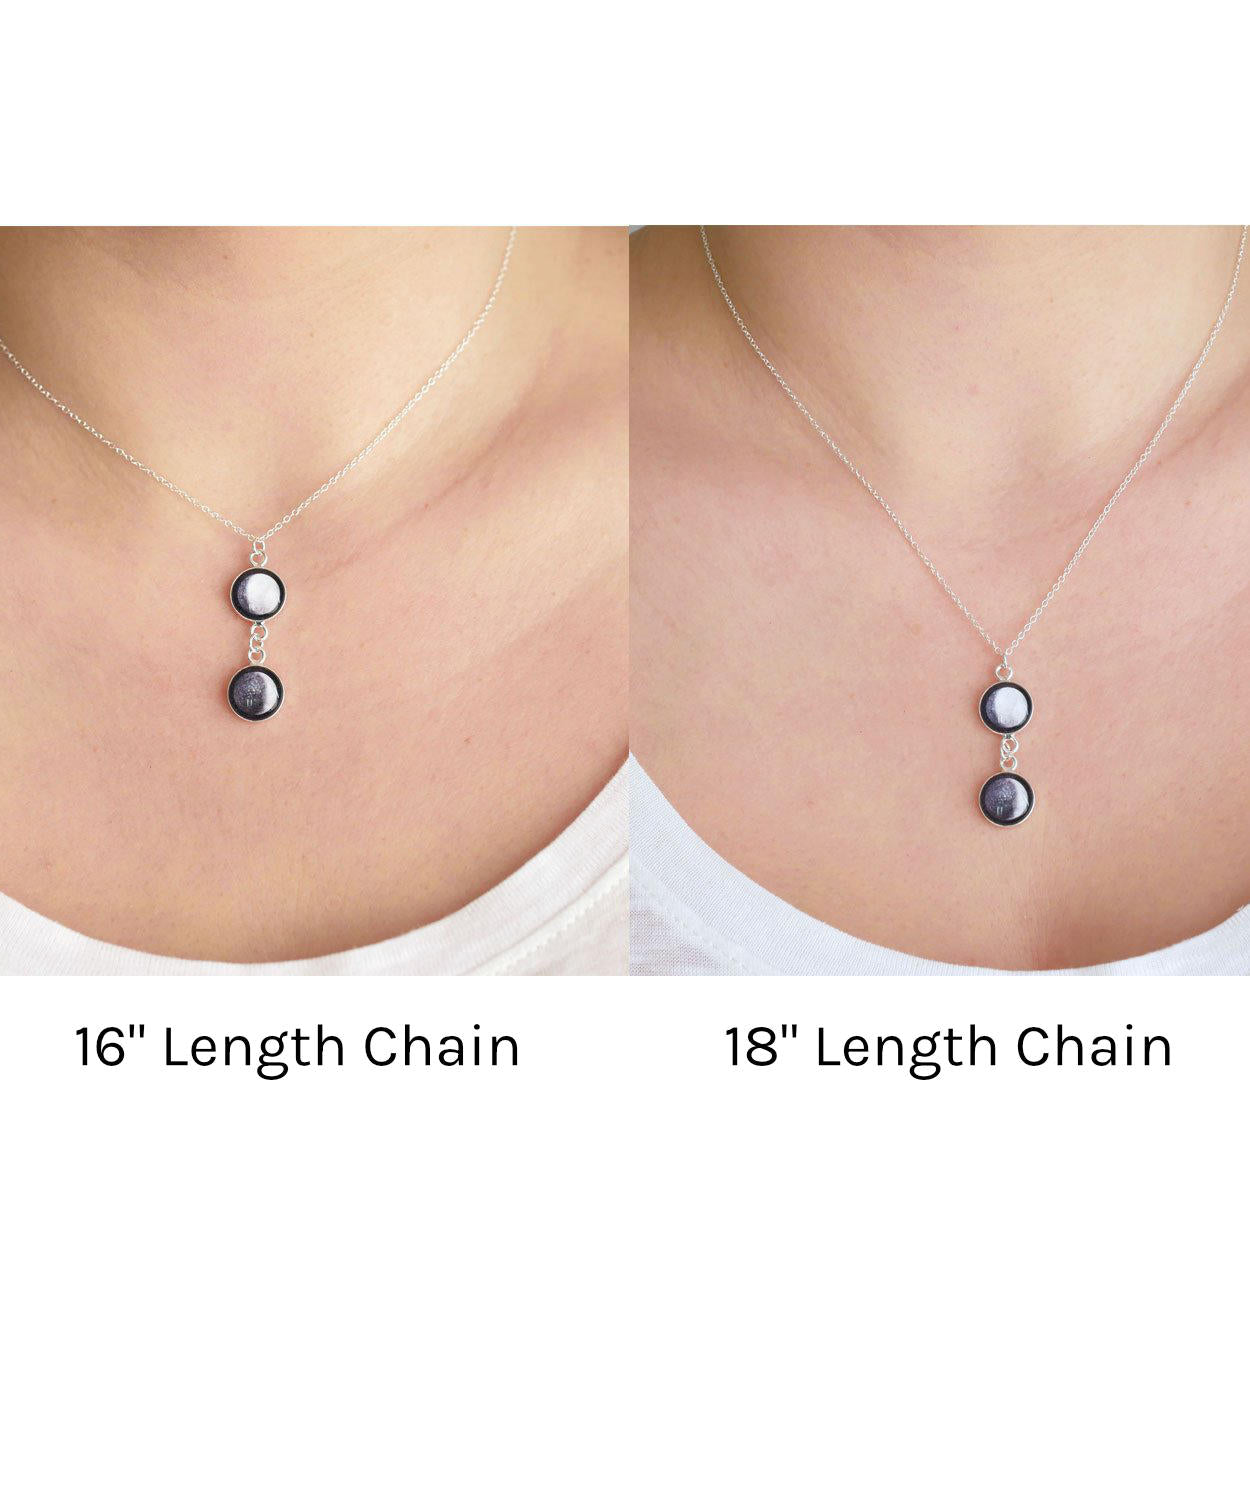 Double Moon Phase Necklace Chain Lengths